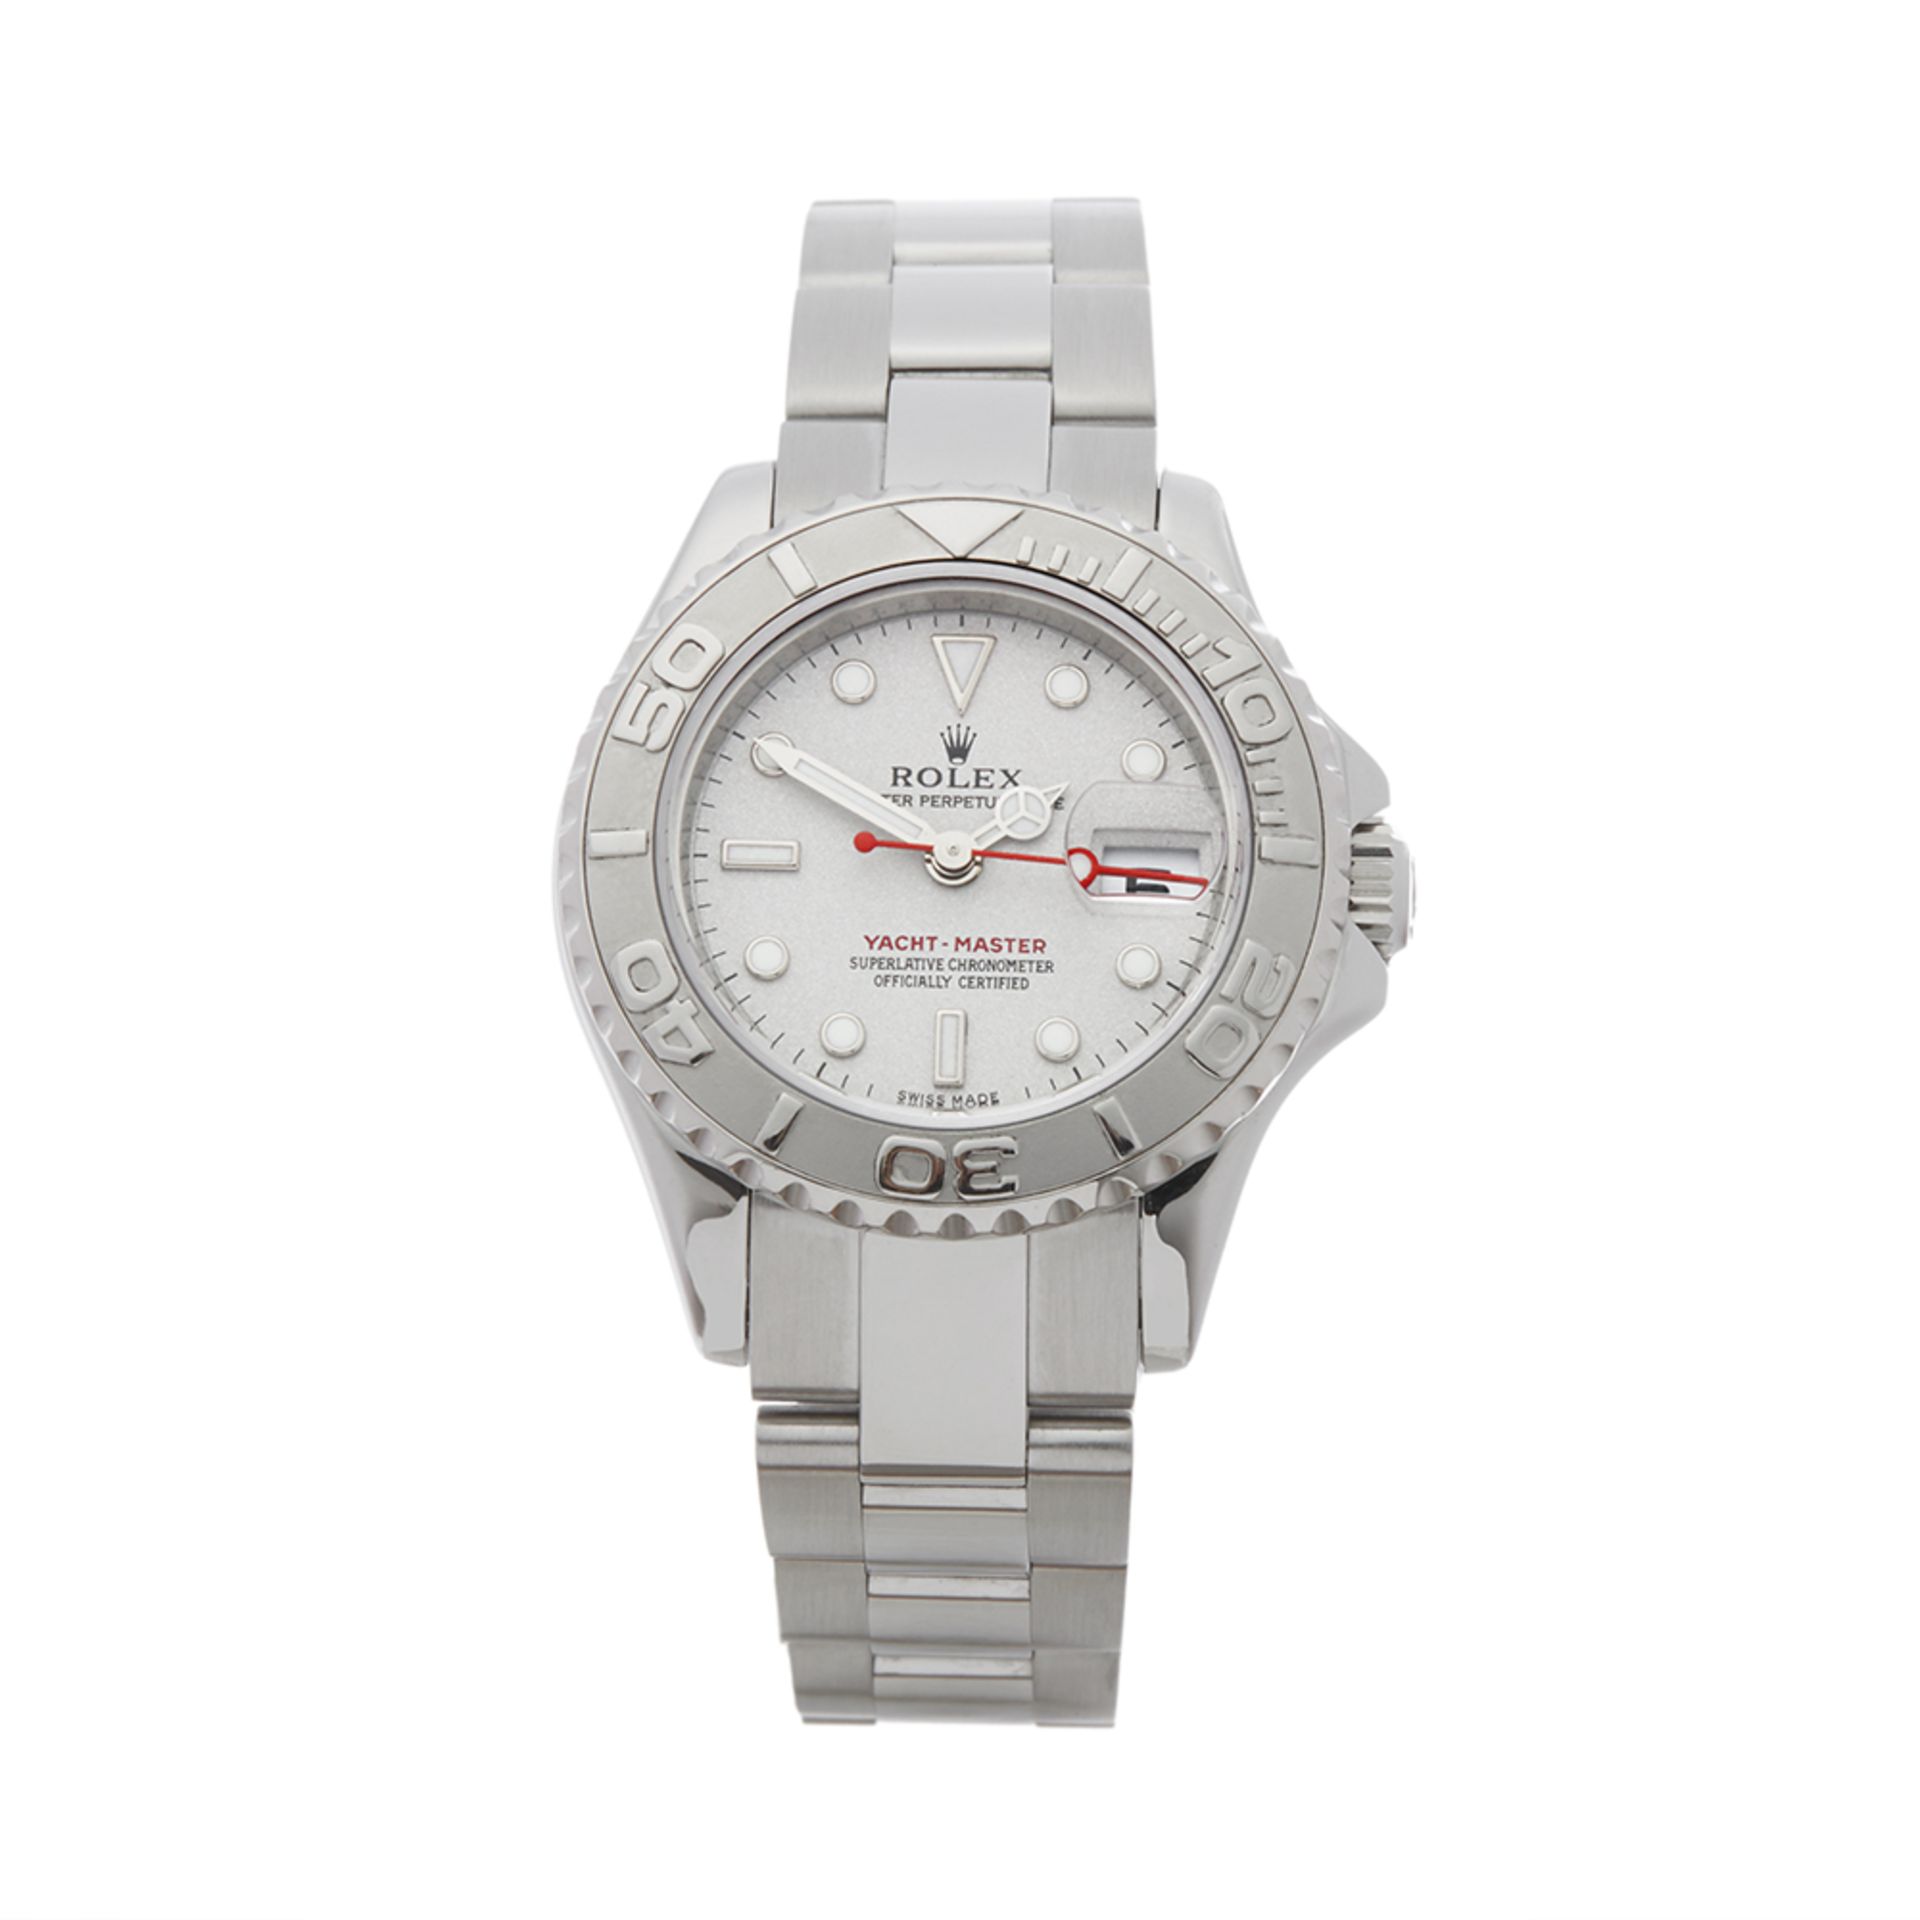 Yacht-Master 28mm Stainless Steel - 169622 - Image 2 of 8